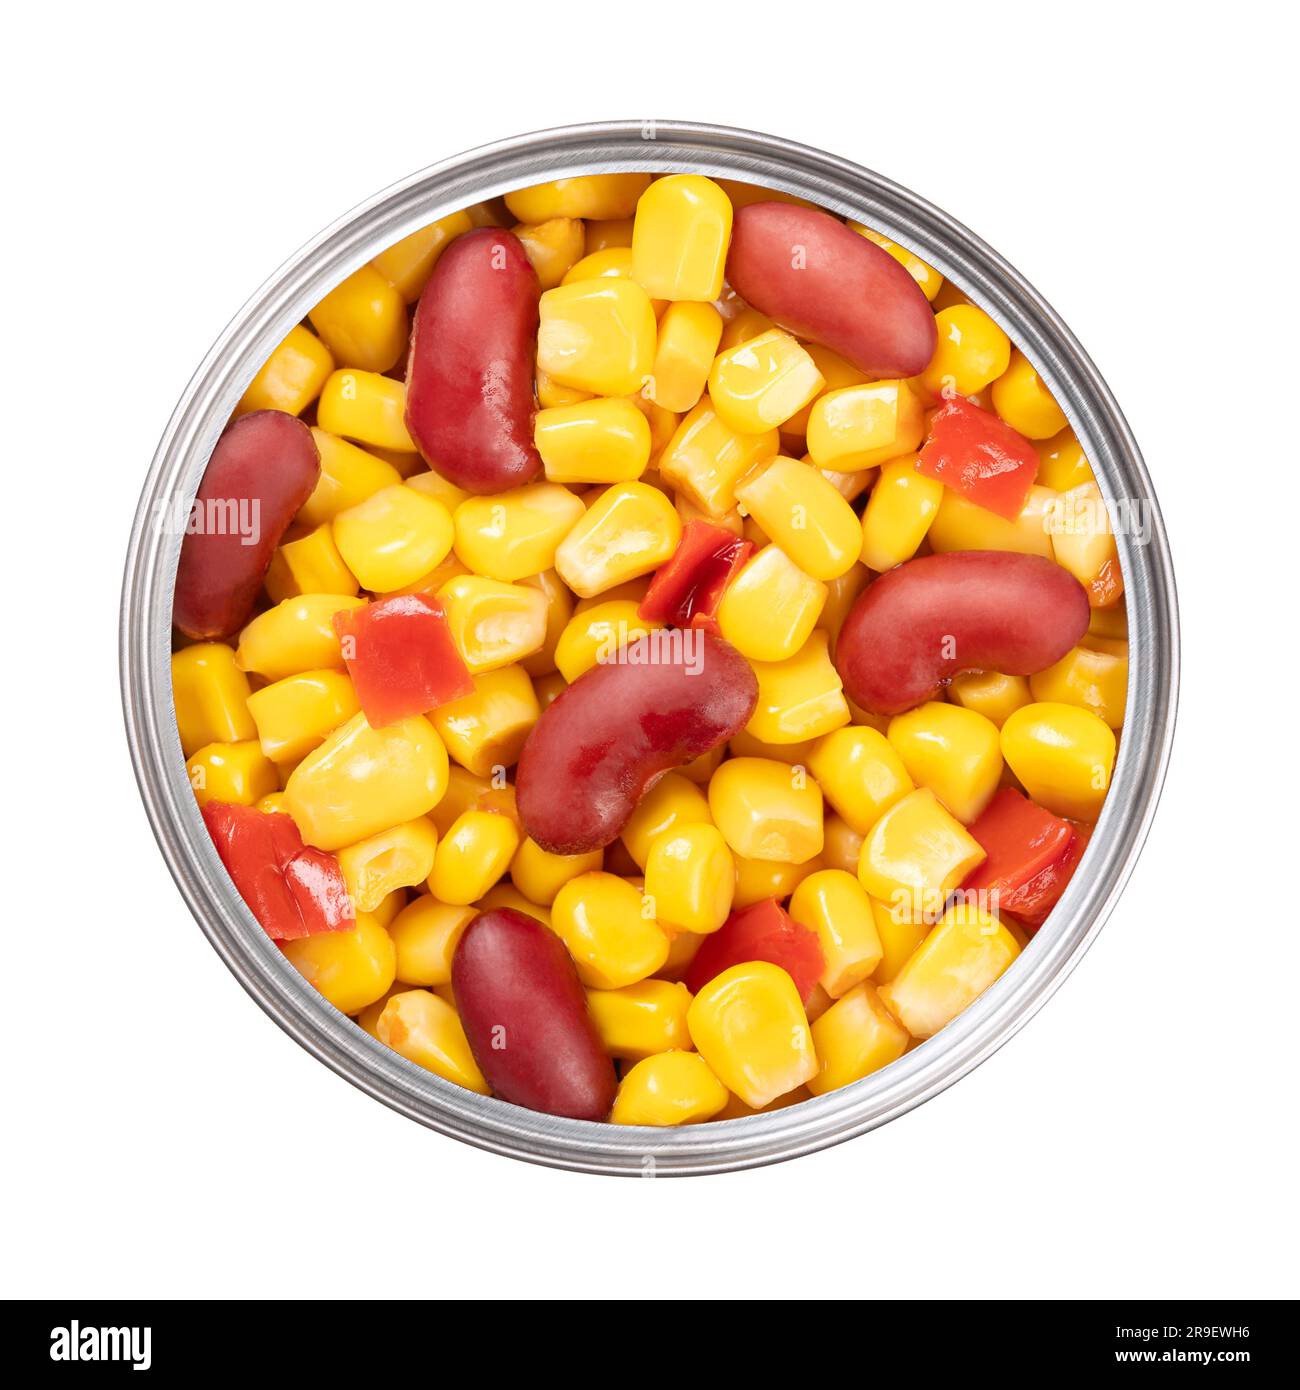 Canned Texas maize mix, corn, red kidney beans and diced bell pepper, in an open tin can. Ready to eat, as a side dish to a barbecue or picnic. Stock Photo